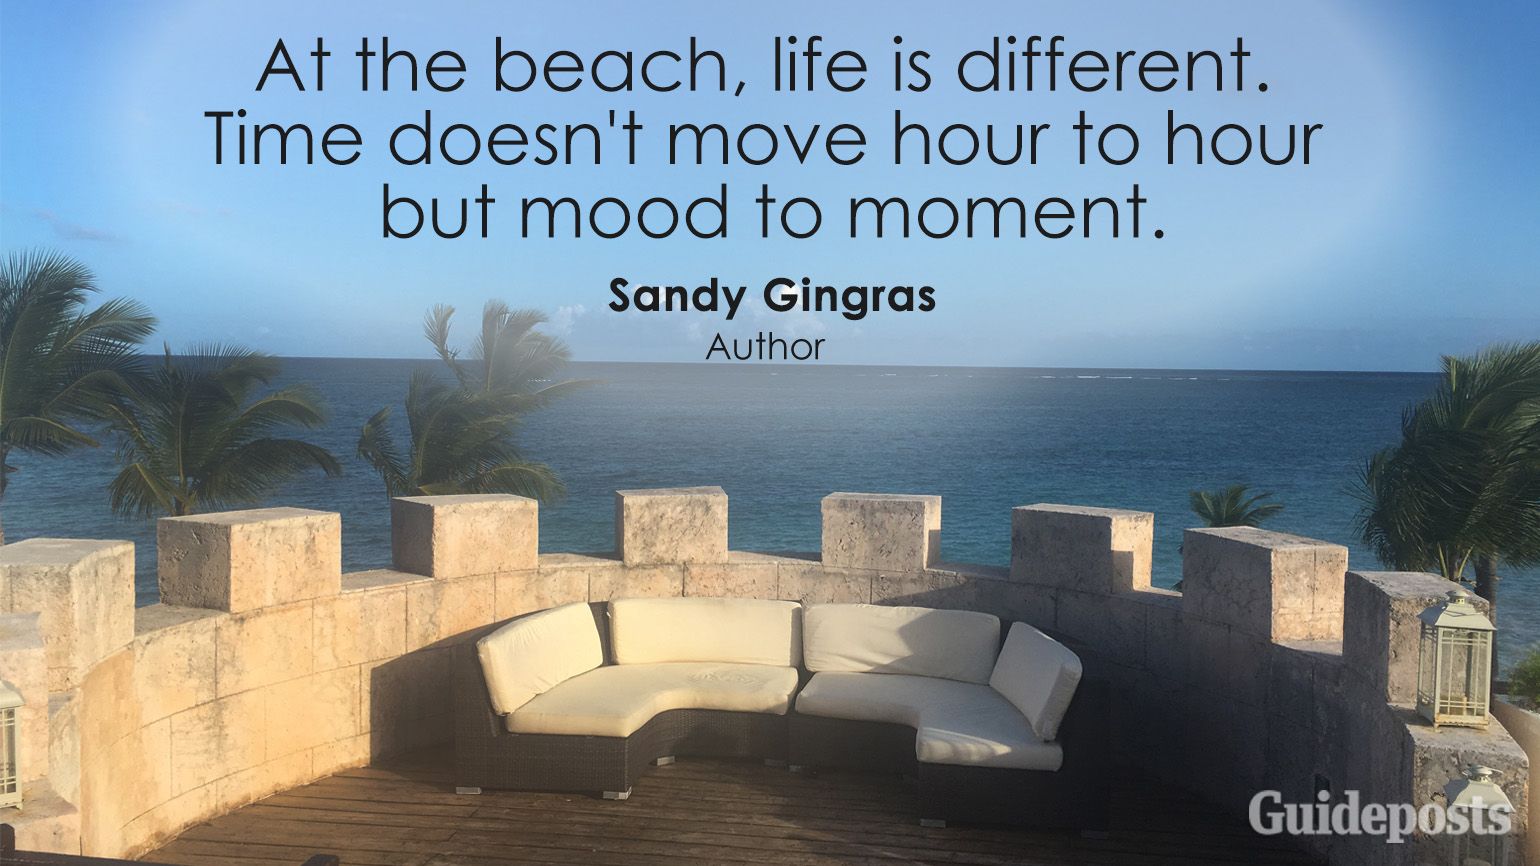 At the beach, life is different. Time doesn't move hour to hour but mood to moment. Sandy Gingras